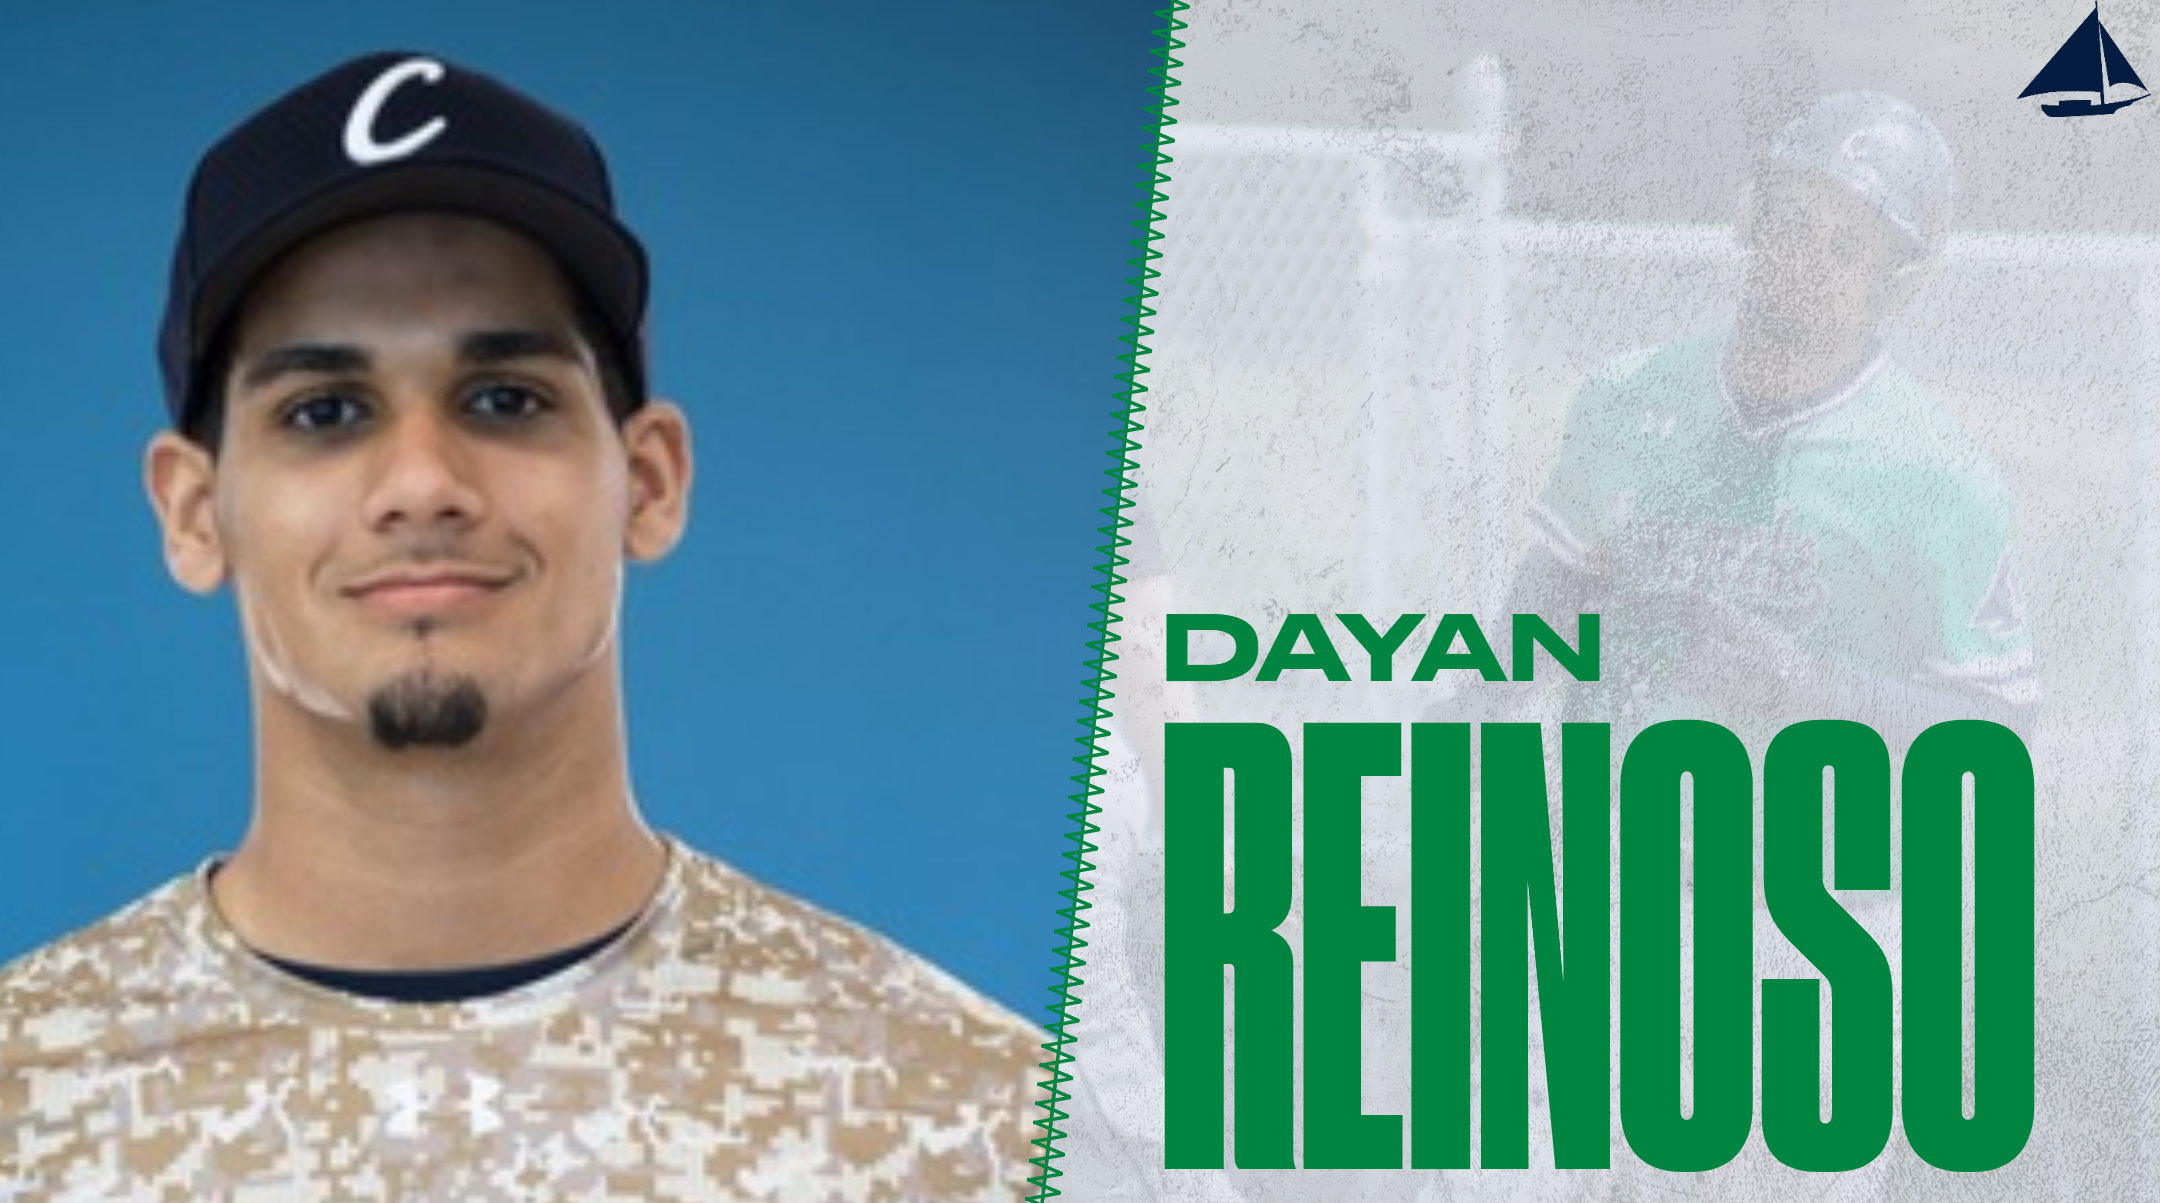 Dayan Reinoso signed with the Los Angeles Angels